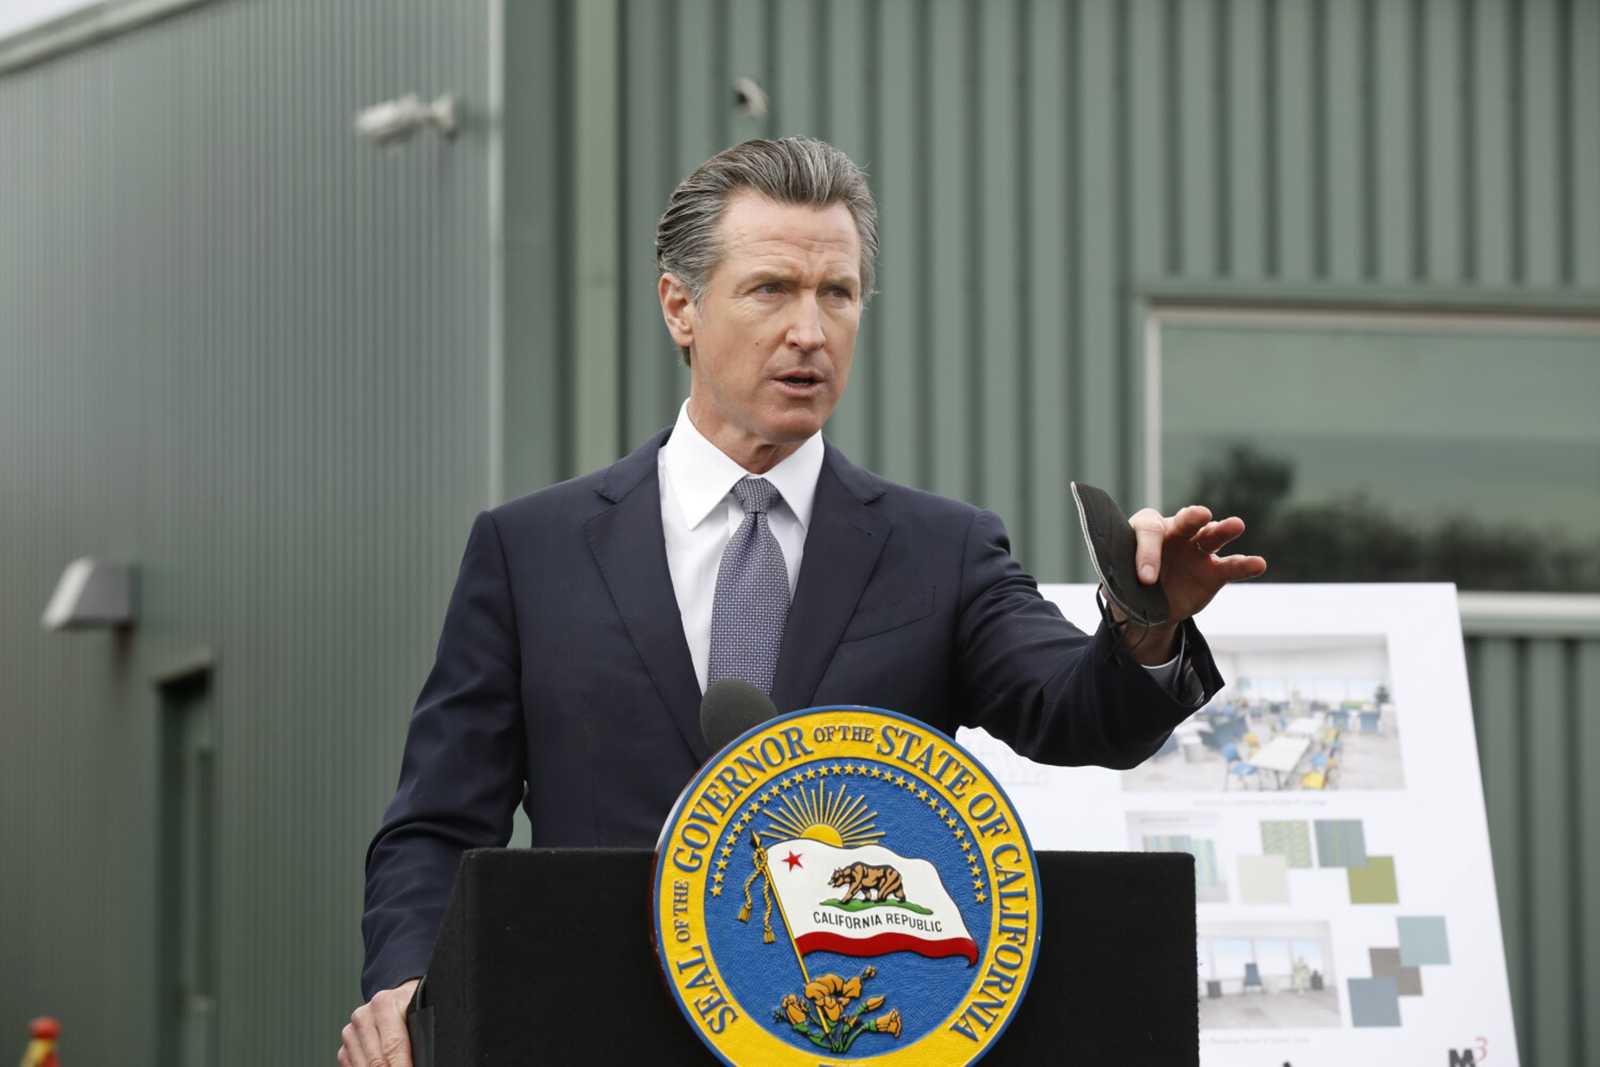 California Gov. Gavin Newsom holds a news conference after taking a tour of the site of a behavioral health and transitional housing facility in Los Angeles County on Jan. 31, 2022. (Carolyn Cole/Los Angeles Times/TNS)